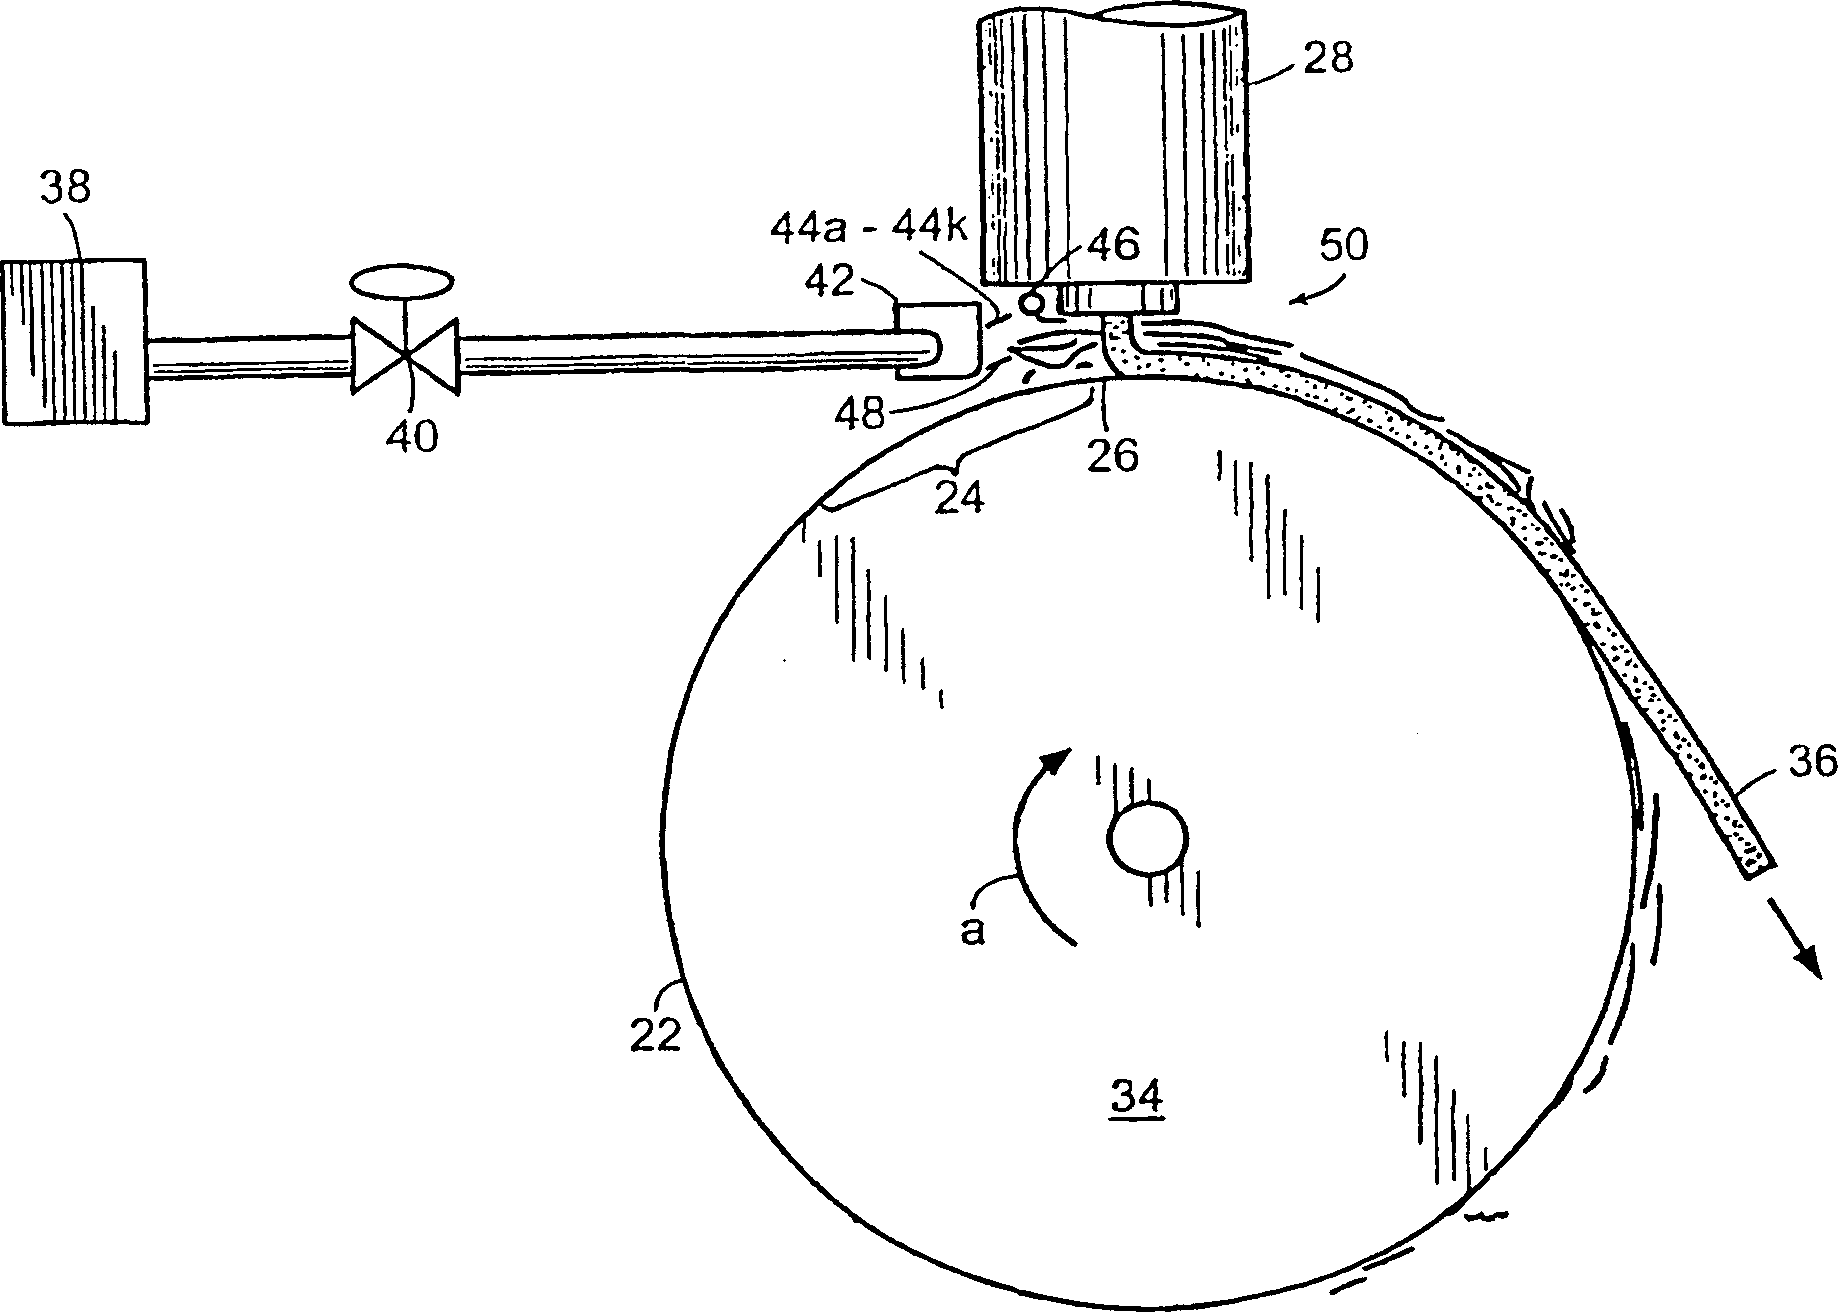 Apparatus and method for casting amorphous metal alloys in an adjustable low density atmosphere